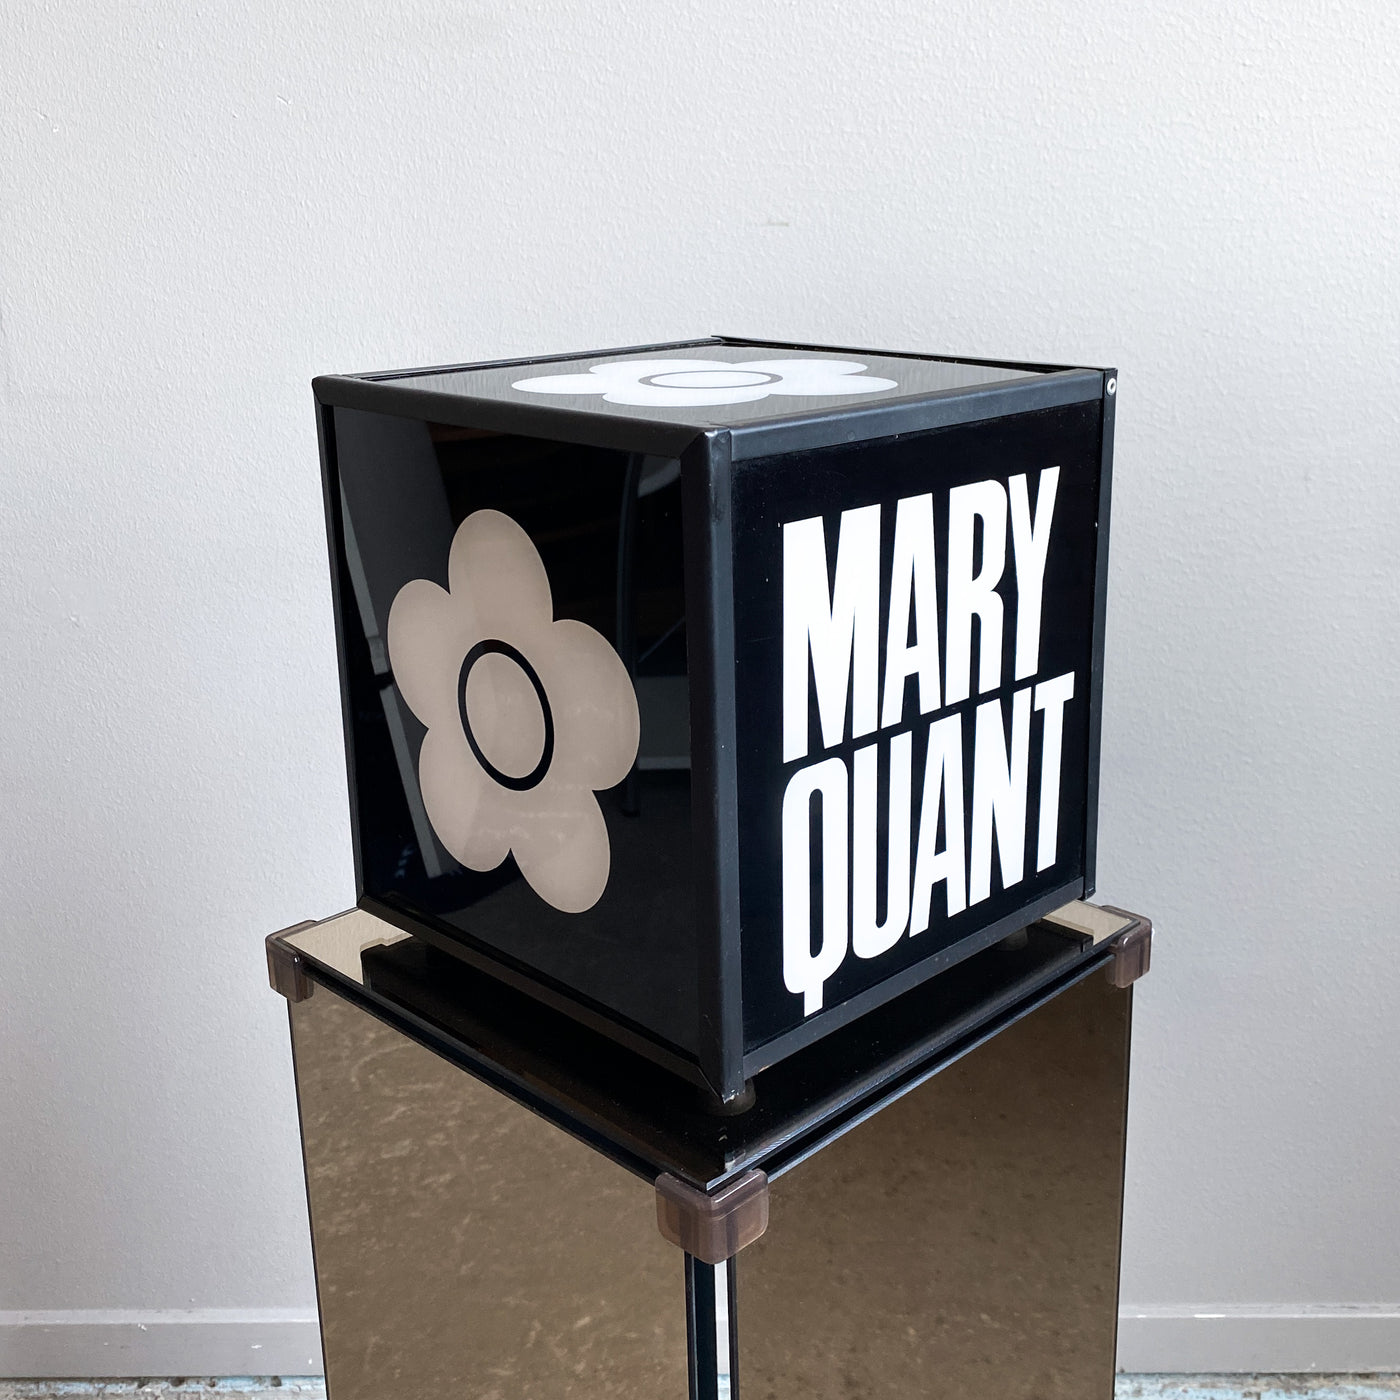 Mary Quant lampa